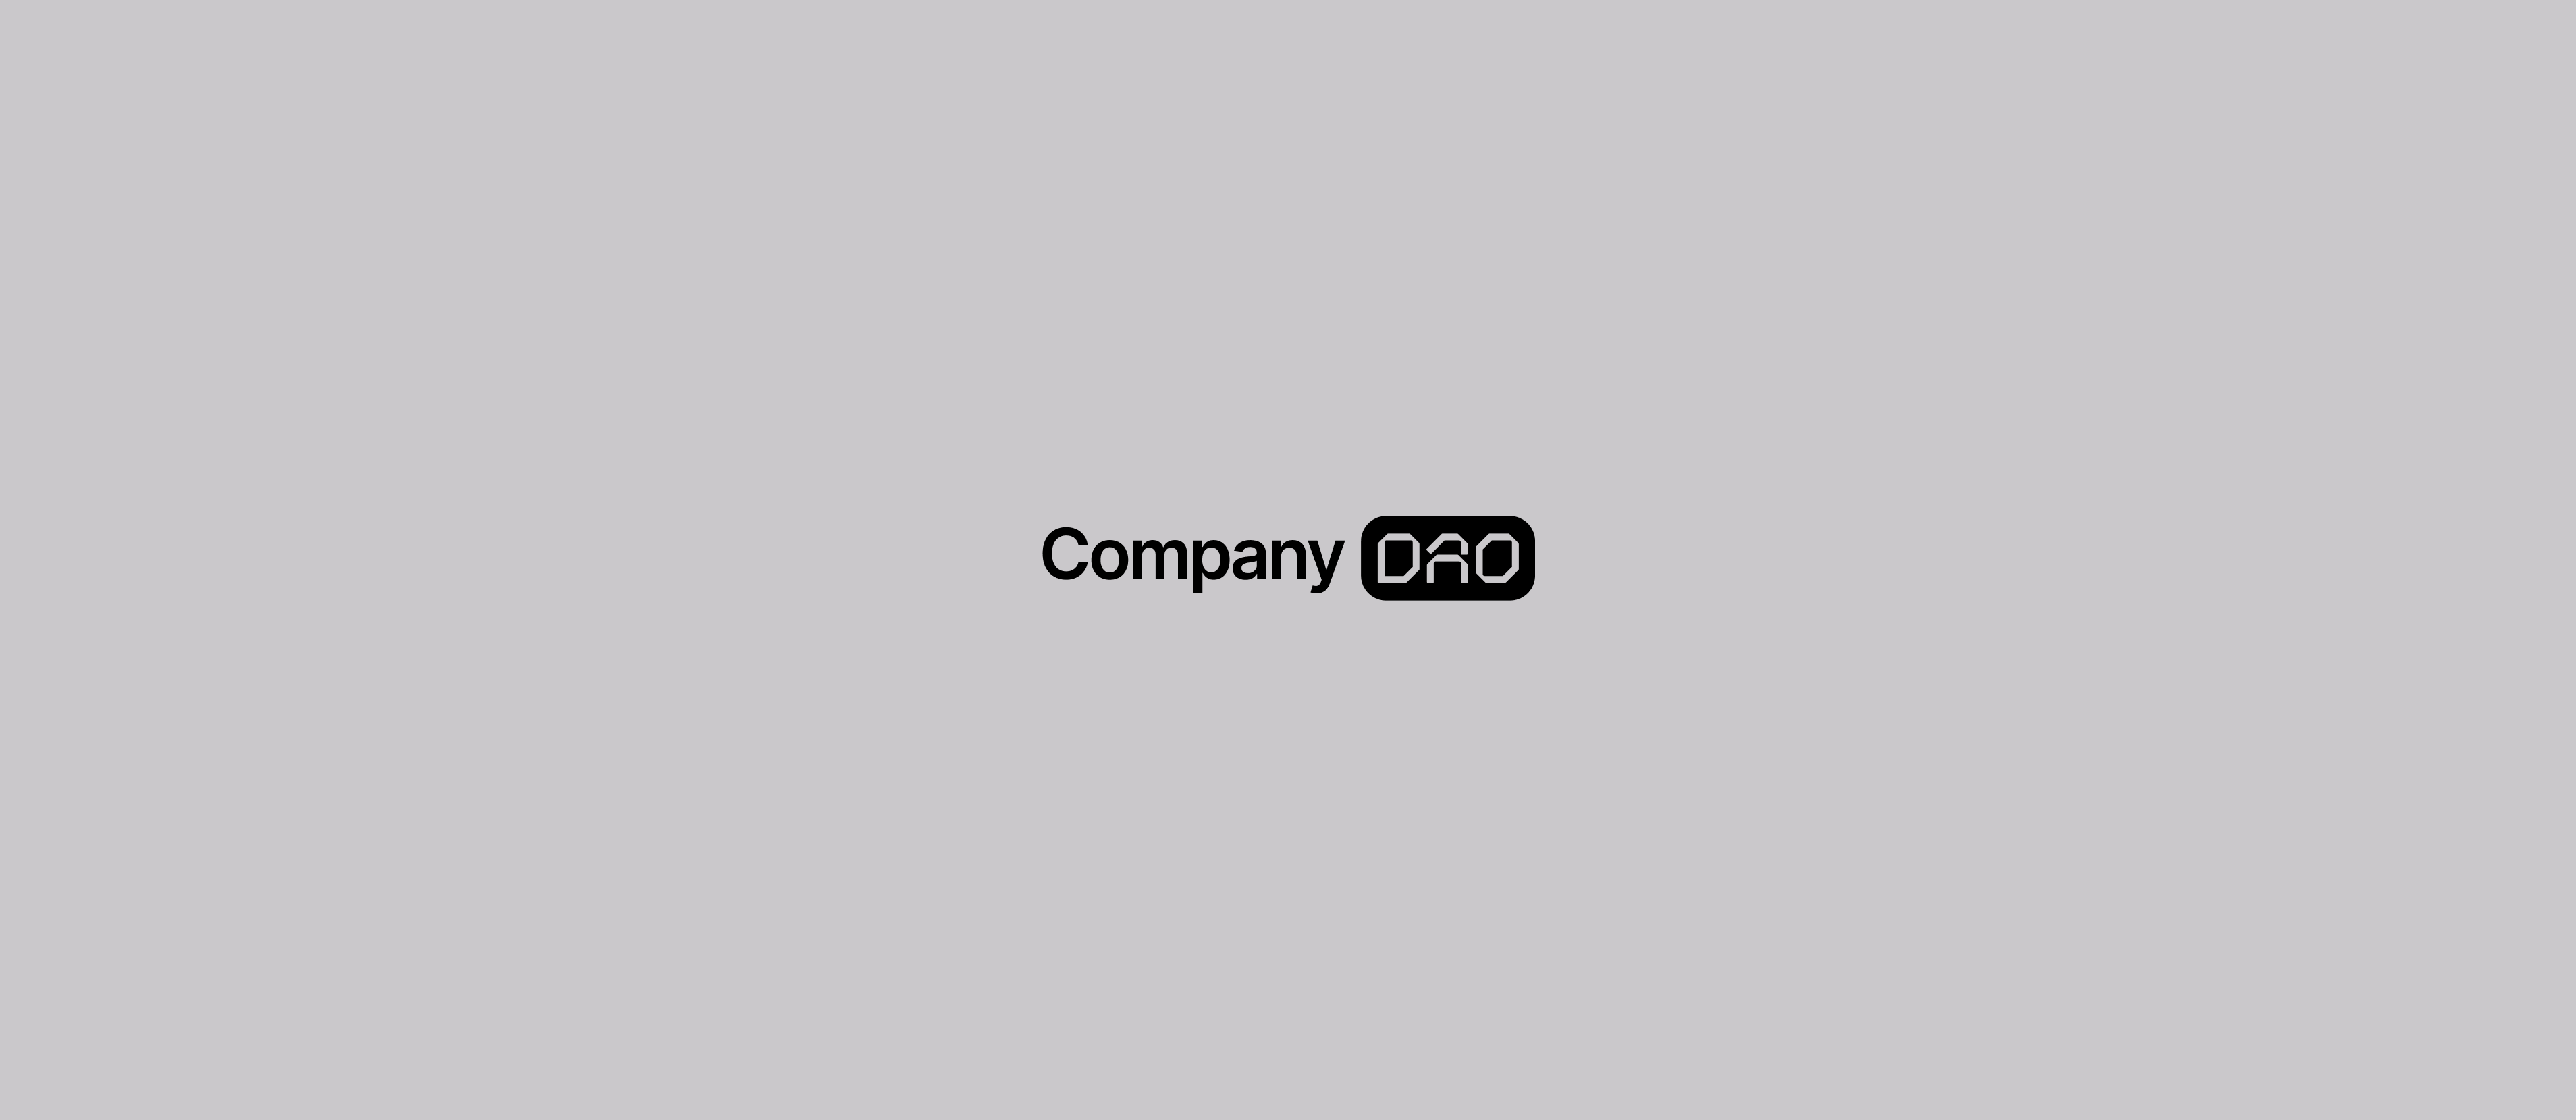 What is Company DAO?